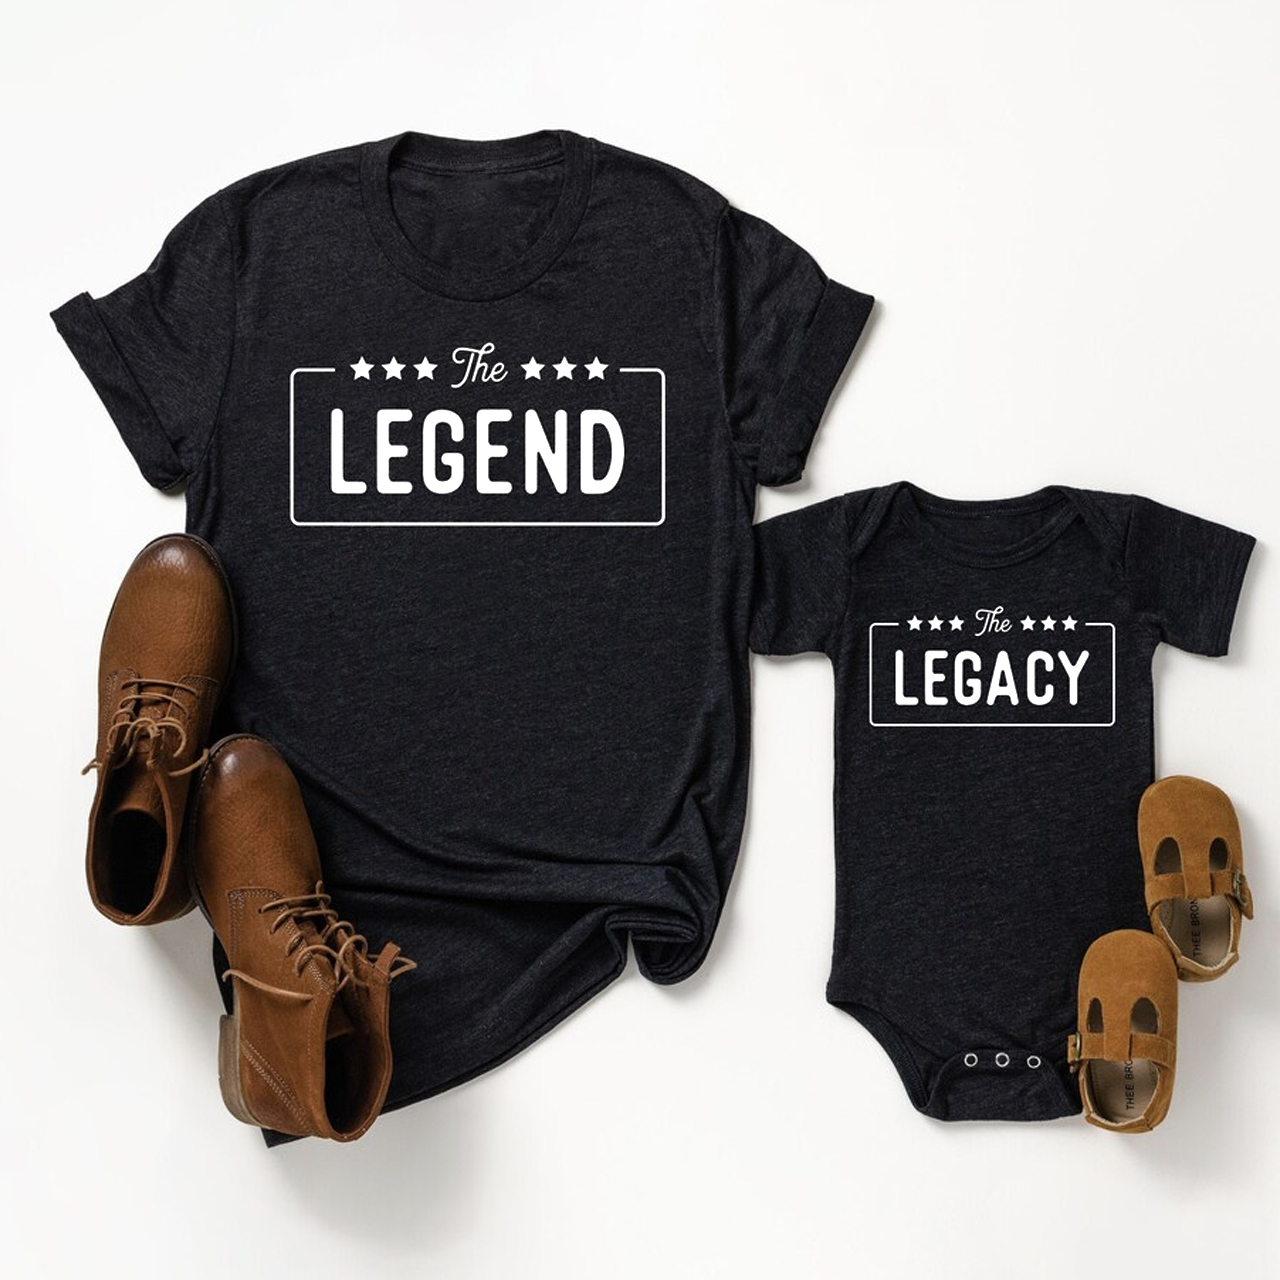 Legend & Legacy Matching Shirt For Father And Me